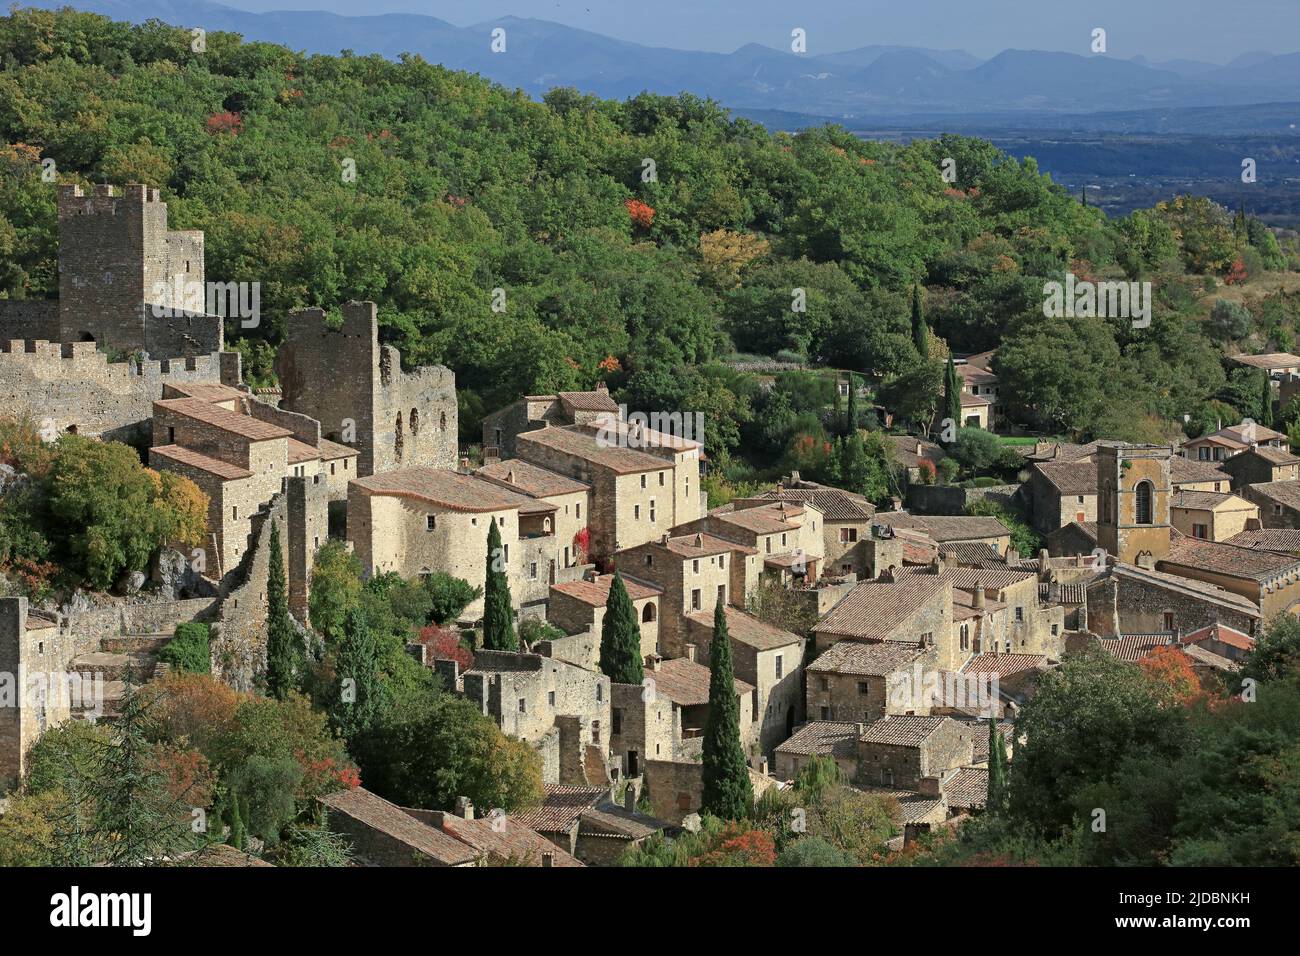 France, Ardèche Saint-Montan medieval village of character dominated by a feudal castle Stock Photo